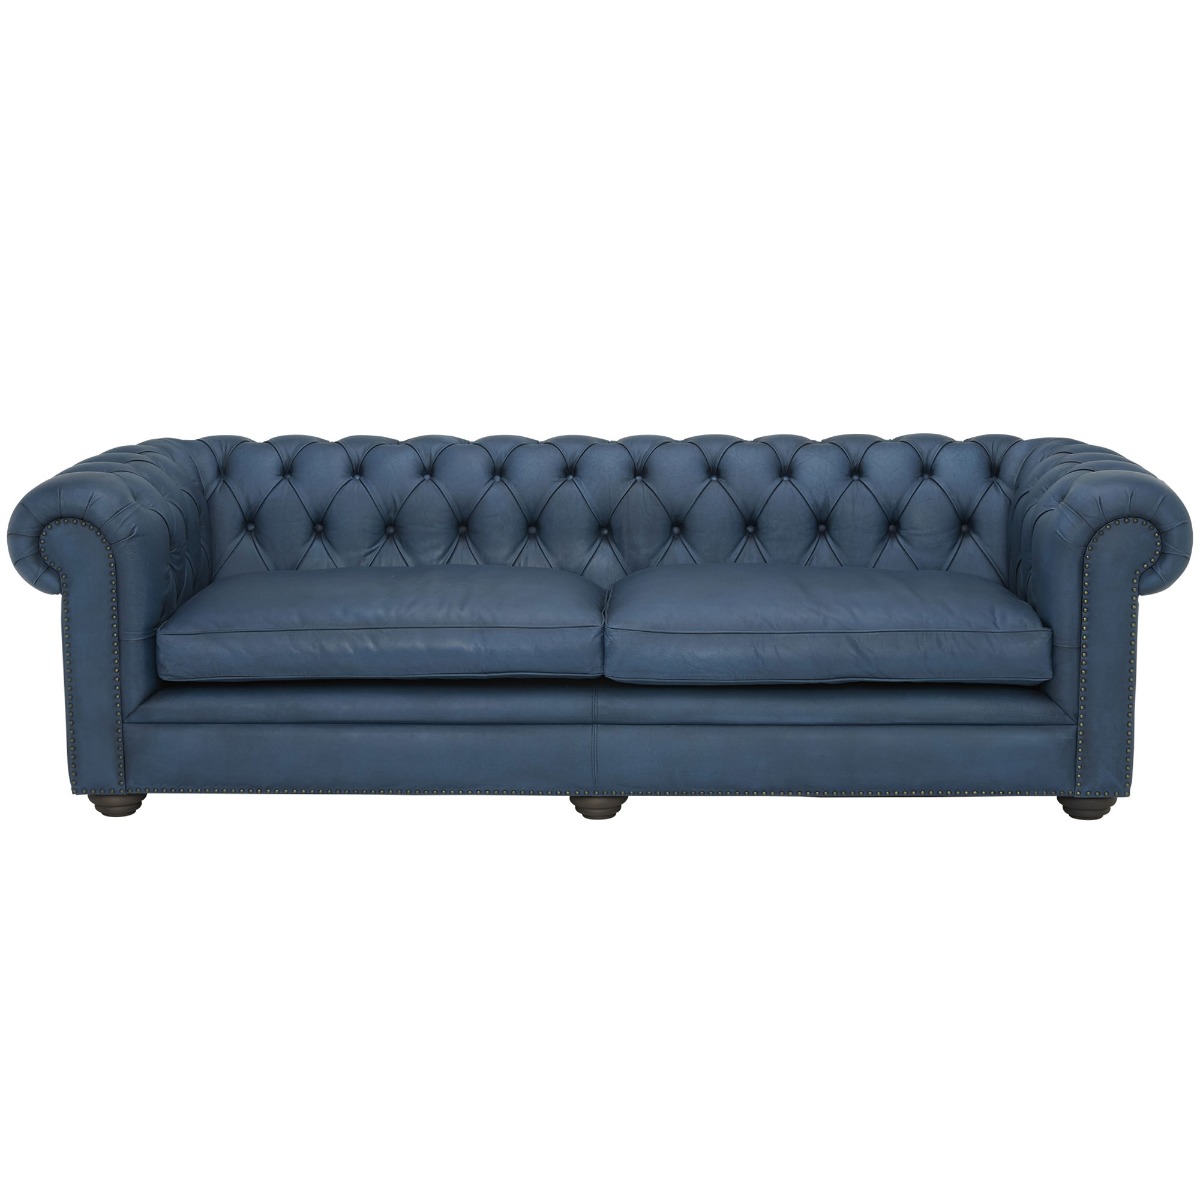 Pure Furniture Winslow Chesterfield Sofa 240cm With Wooden Legs, Blue Leather | Barker & Stonehouse